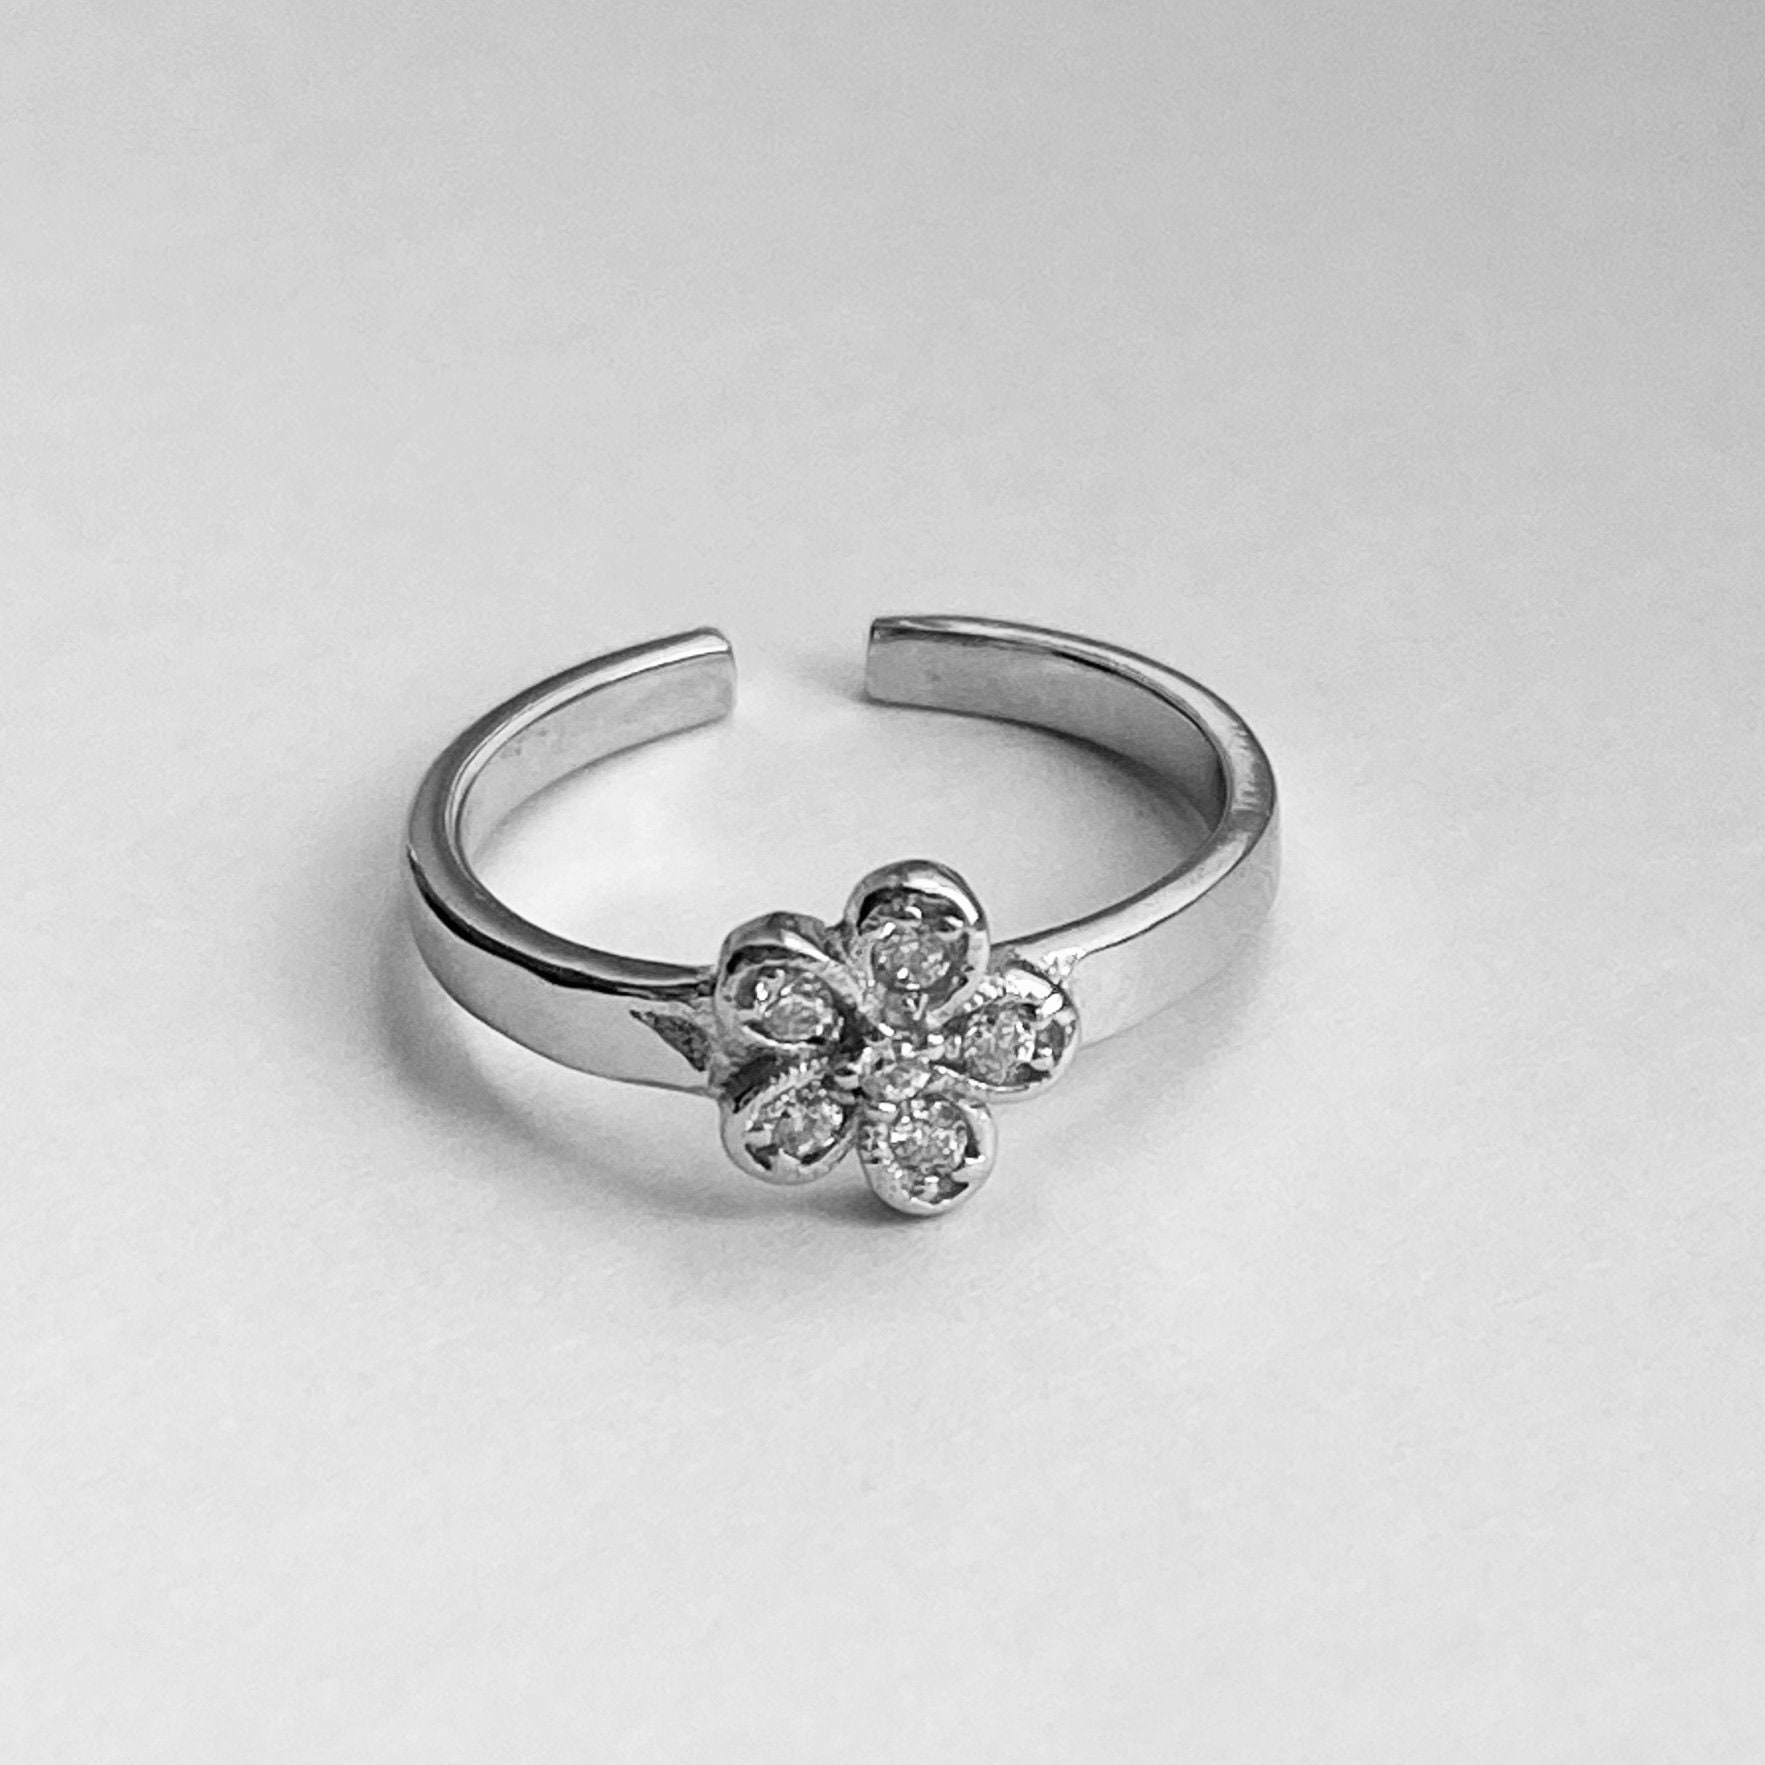 Sterling Silver CZ Flower Toe Ring Silver Ring CZ Ring | Etsy